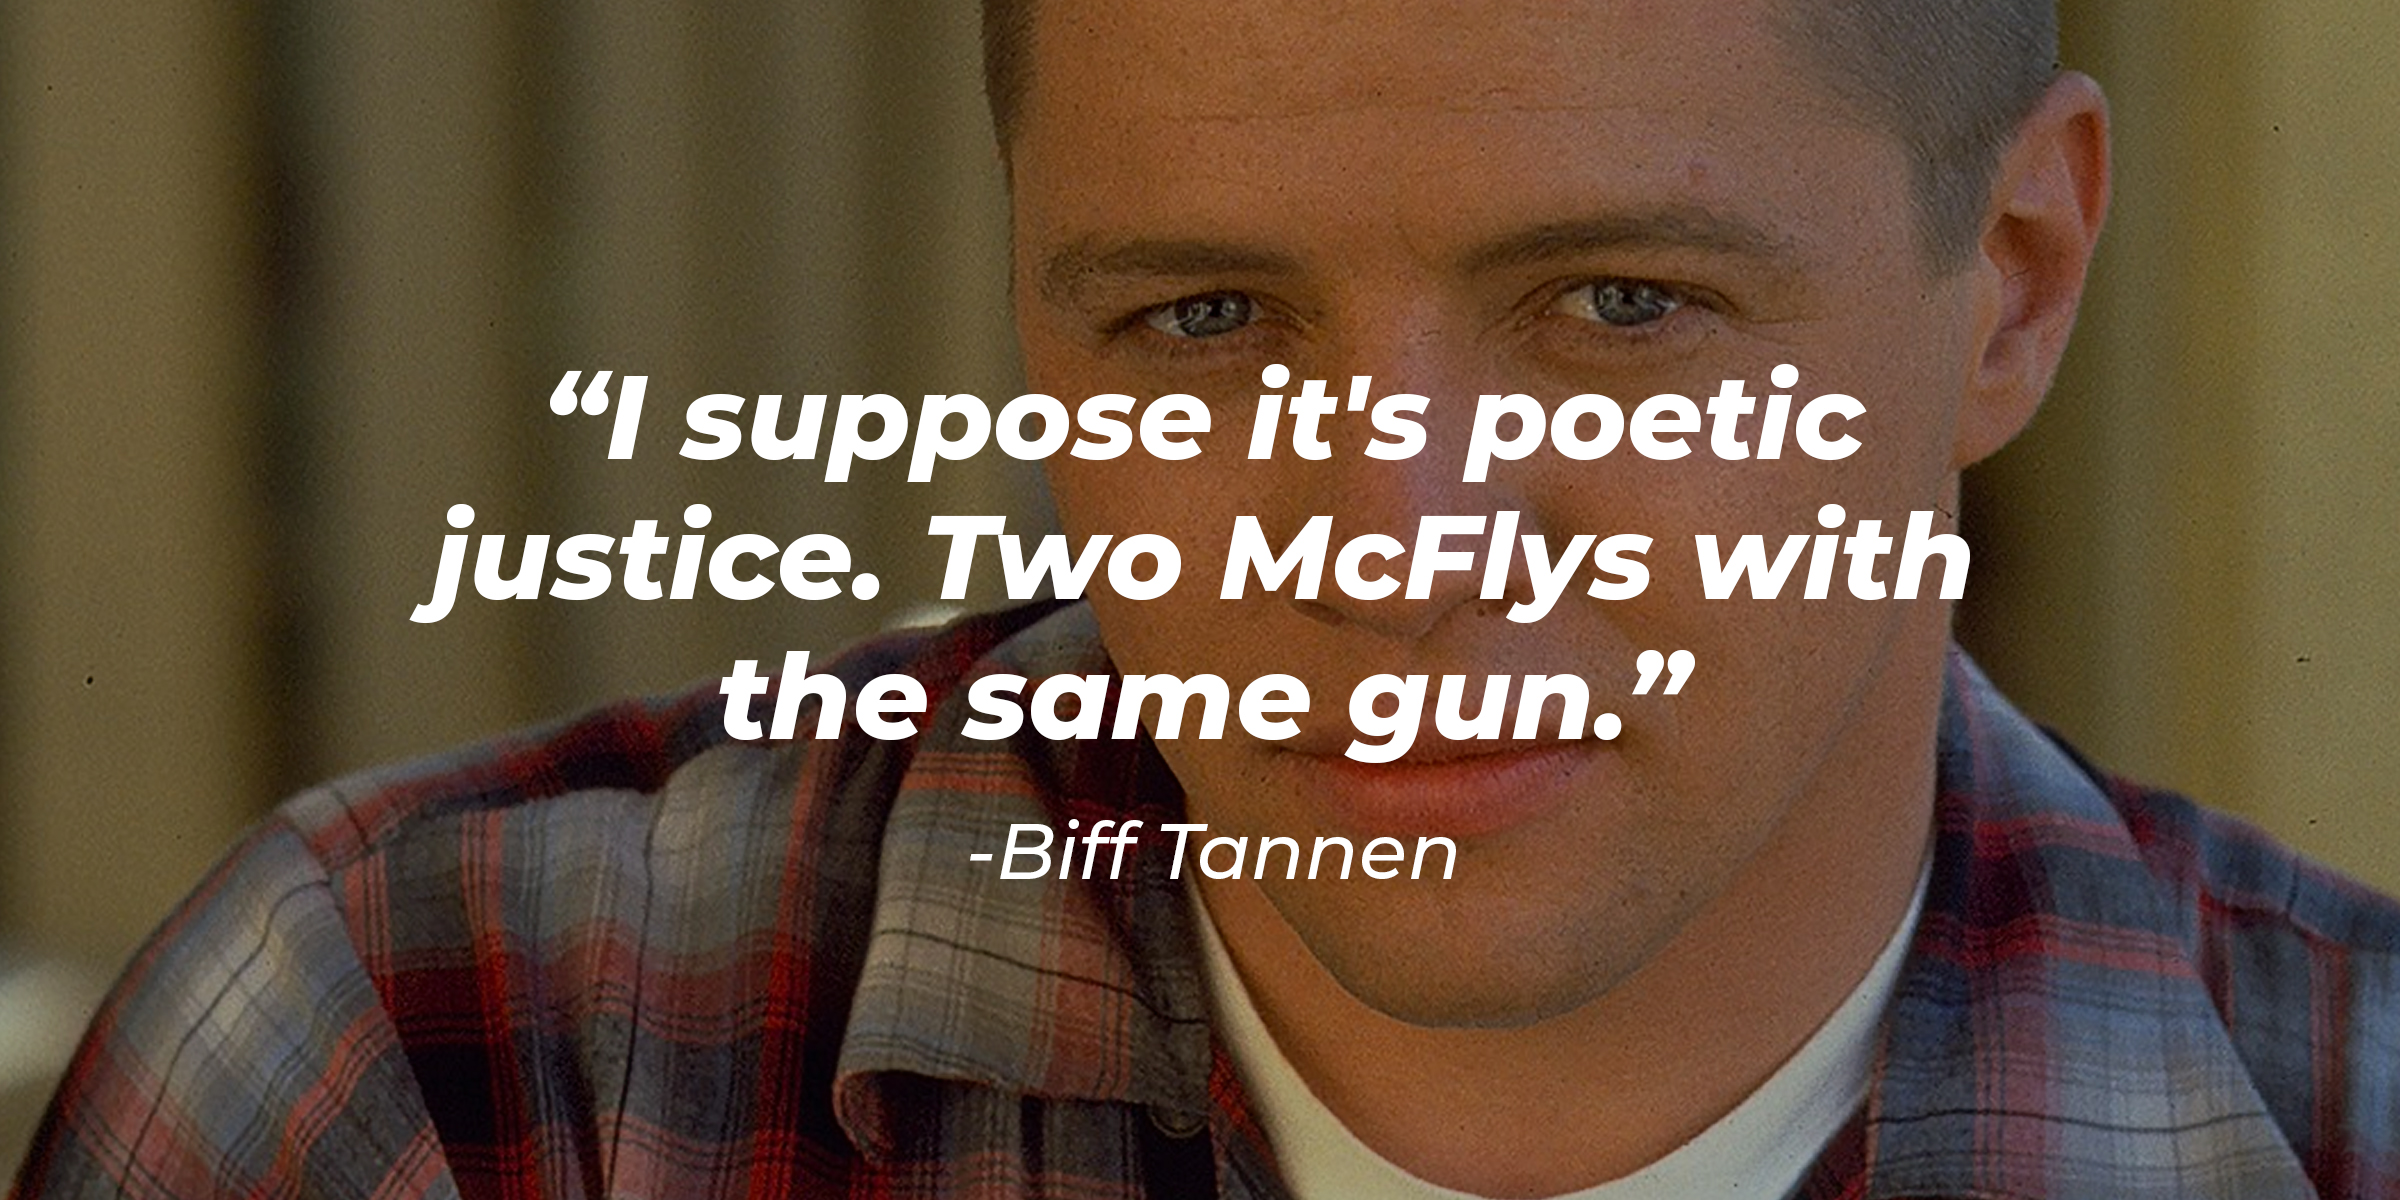 Biff Tannen’s image with quote: “I suppose it's poetic justice. Two McFlys with the same gun.” | Source: Facebook.com/BTTF